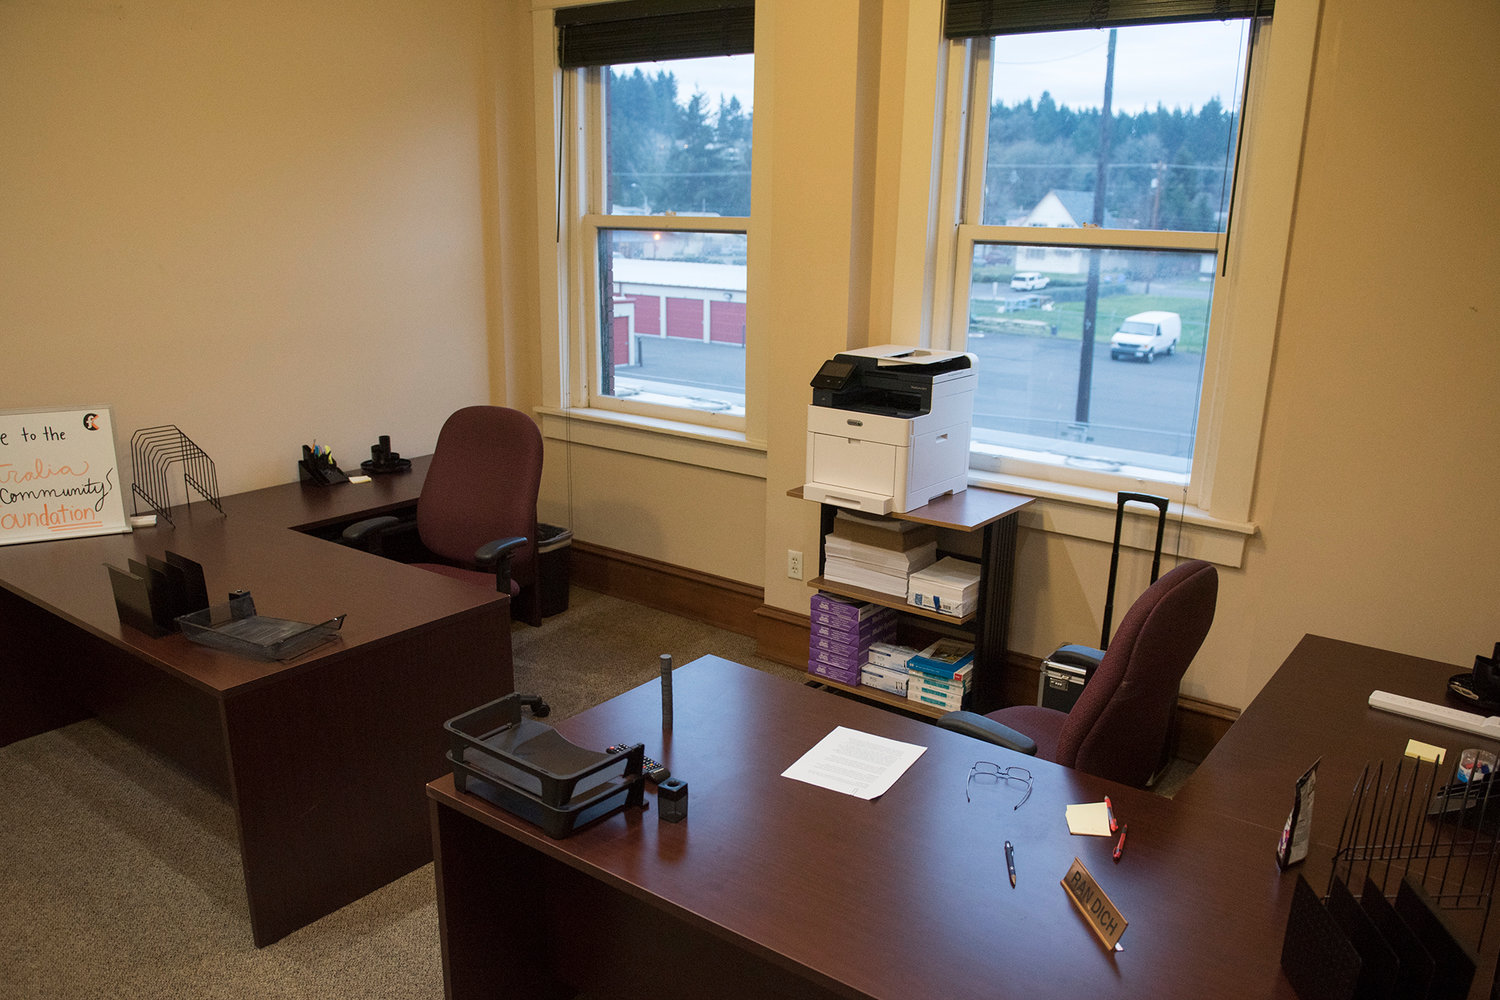 Centralia Community Foundation’s new office is seen Thursday evening at an open house in Centralia.